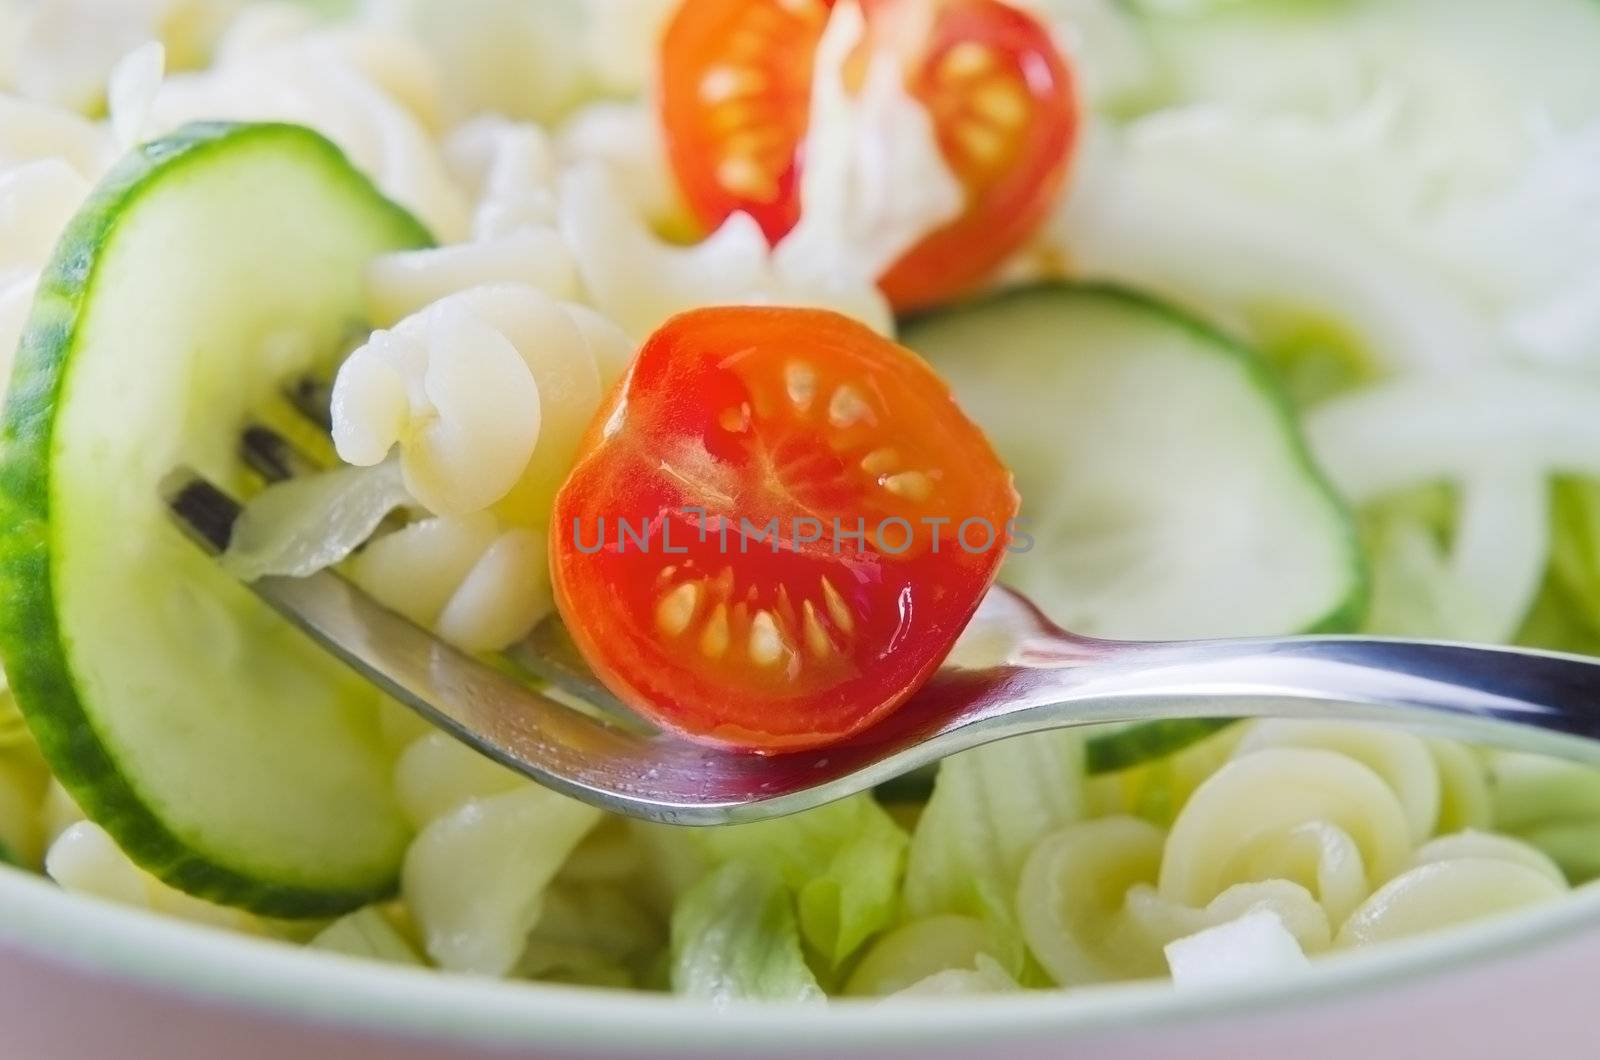 Close up (macro) of a fork, lifting a red cherry tomato, pasta and cucumber slice from a bowl of green salad, with tomato in centre of frame.